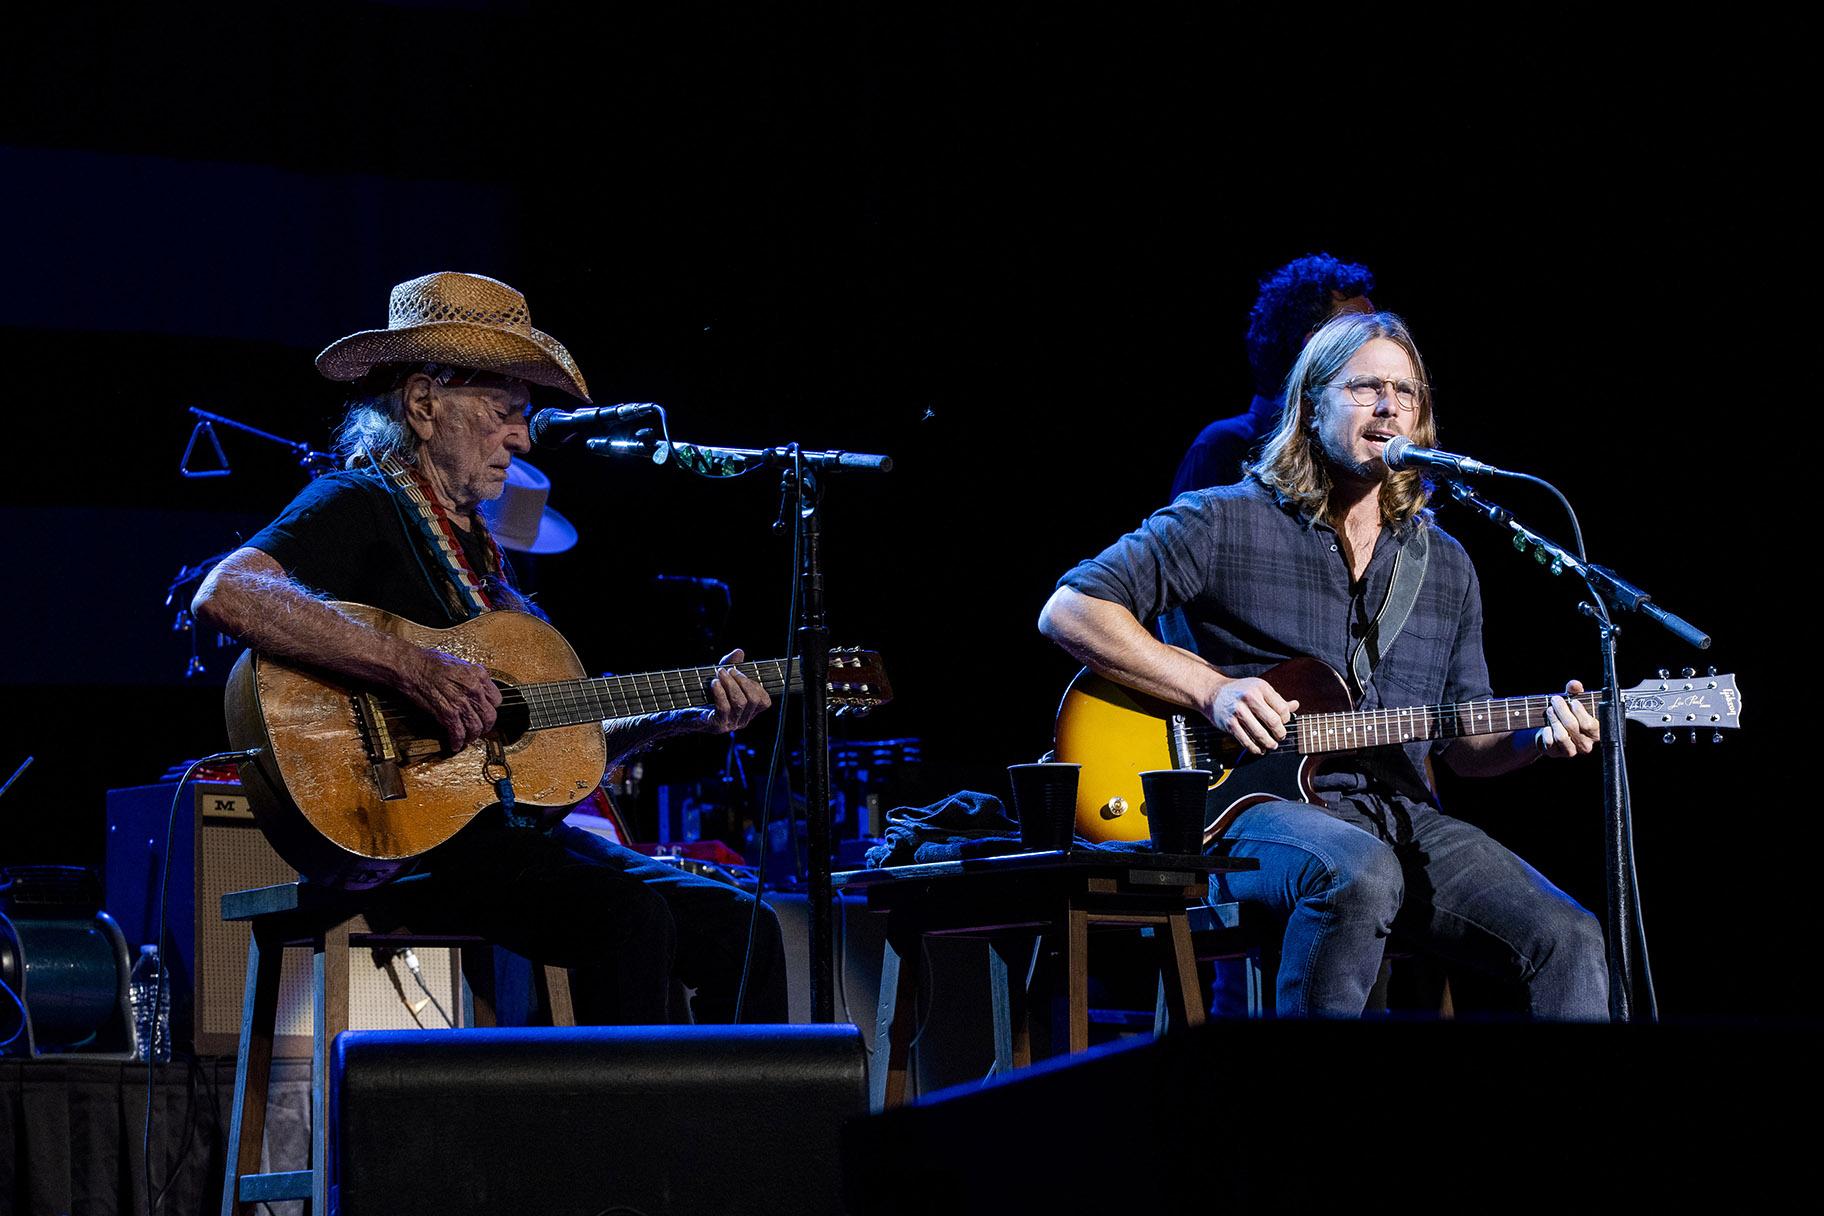 Willie Nelson and Lukas Nelson at Ravinia on Saturday, Aug. 14, 2021. (Credit: Kyle Dunleavy)